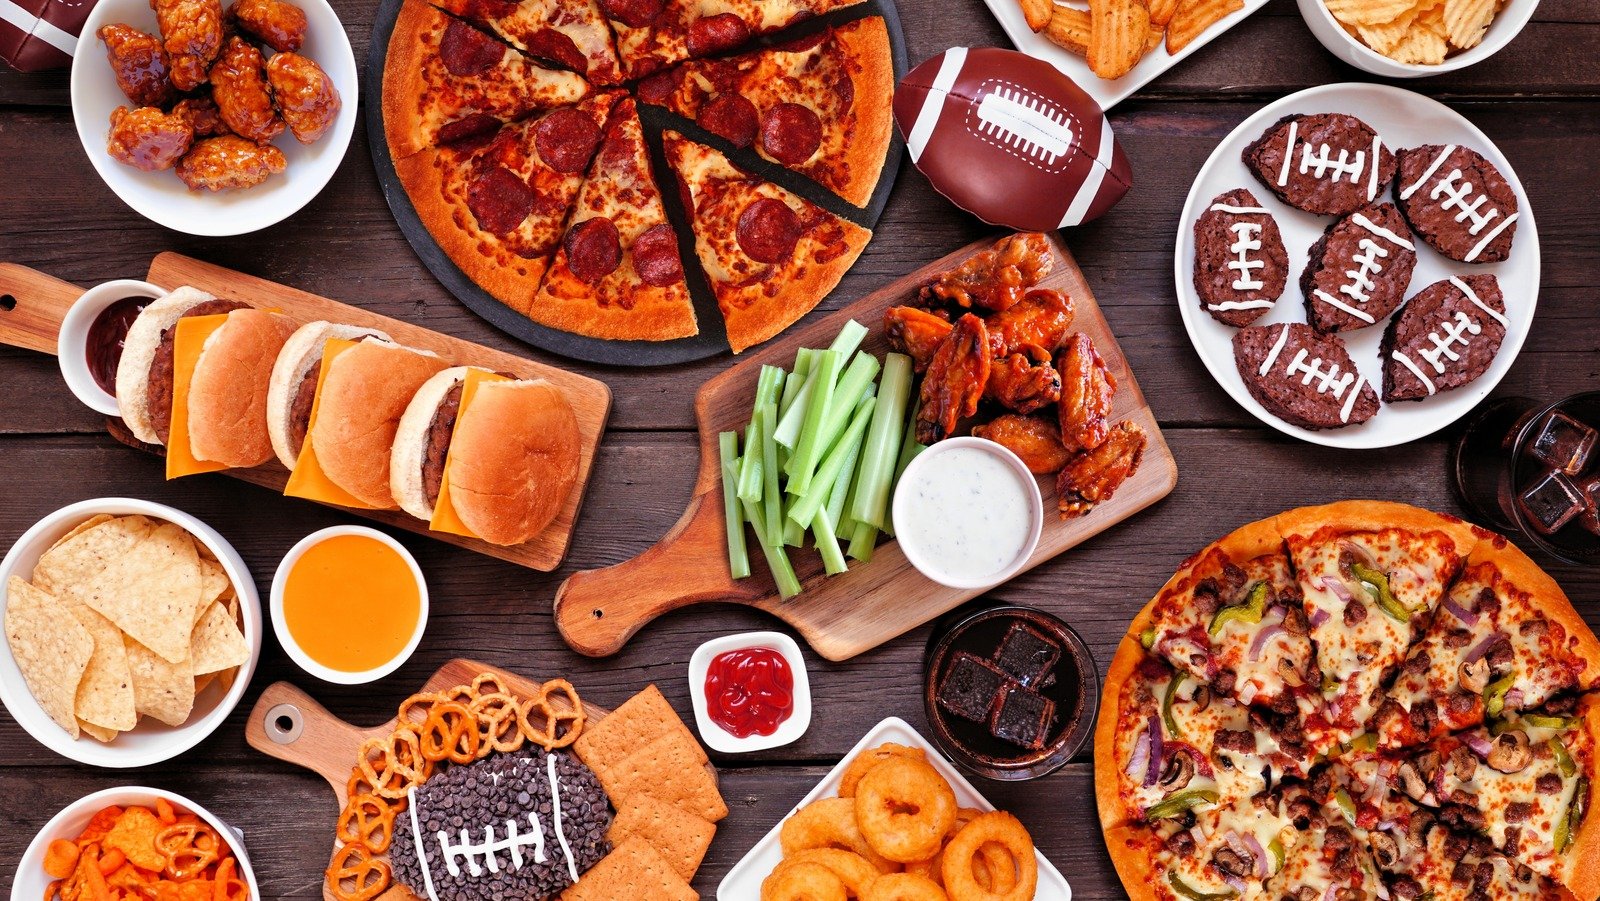 Survey Shows Super Bowl Viewers Care More About Food Than The Party